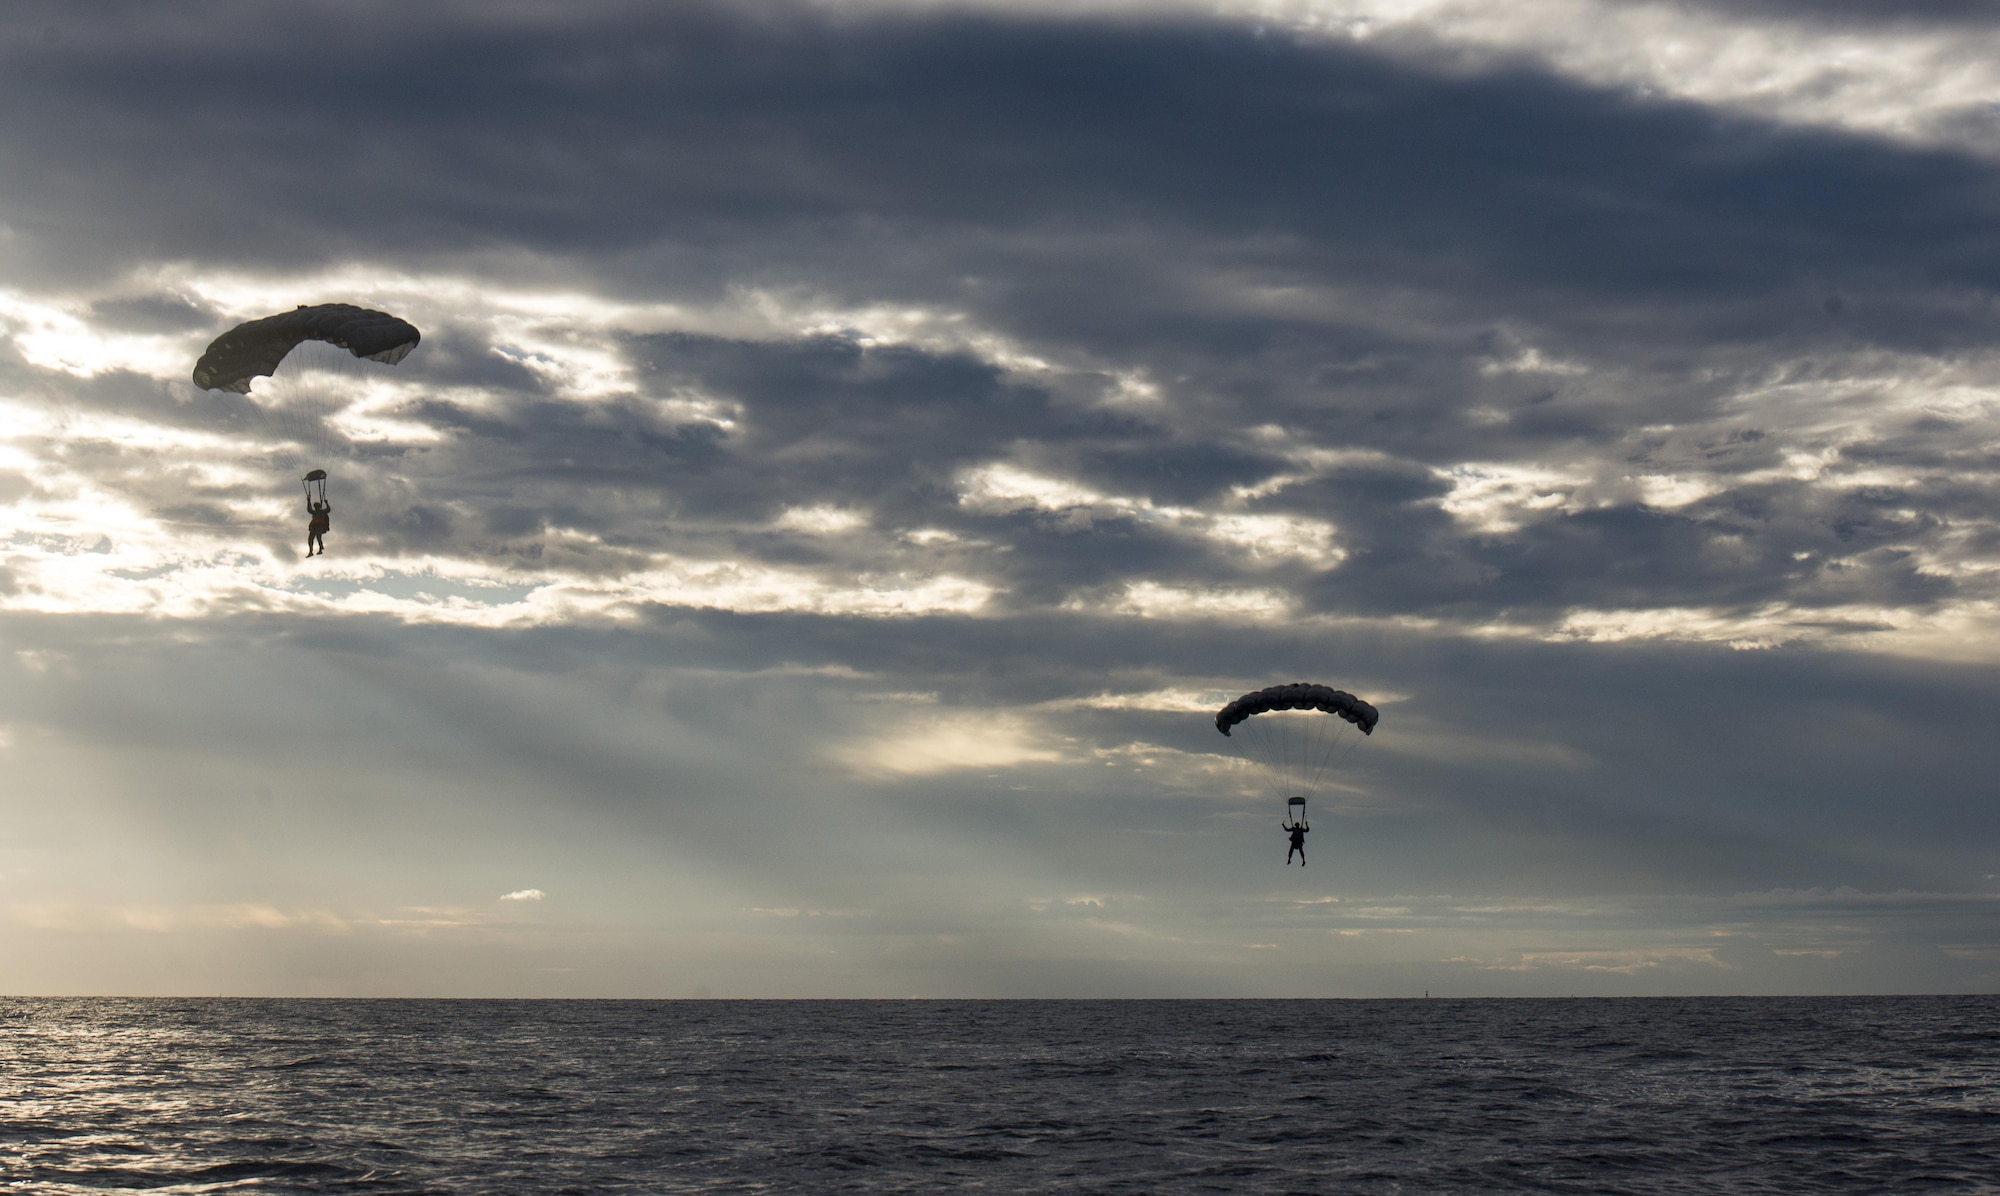 U.S. Air Force Airmen from the 320th Special Tactics Squadron at Kadena Air Base, Japan, parachute into the Pacific Ocean at dawn Nov. 22, 2016, off the western coast Okinawa, Japan. The 320th STS Airmen train to operate in adverse conditions at sea or overland to accomplish their mission. (U.S. Air Force photo by Senior Airman Omari Bernard/Released)